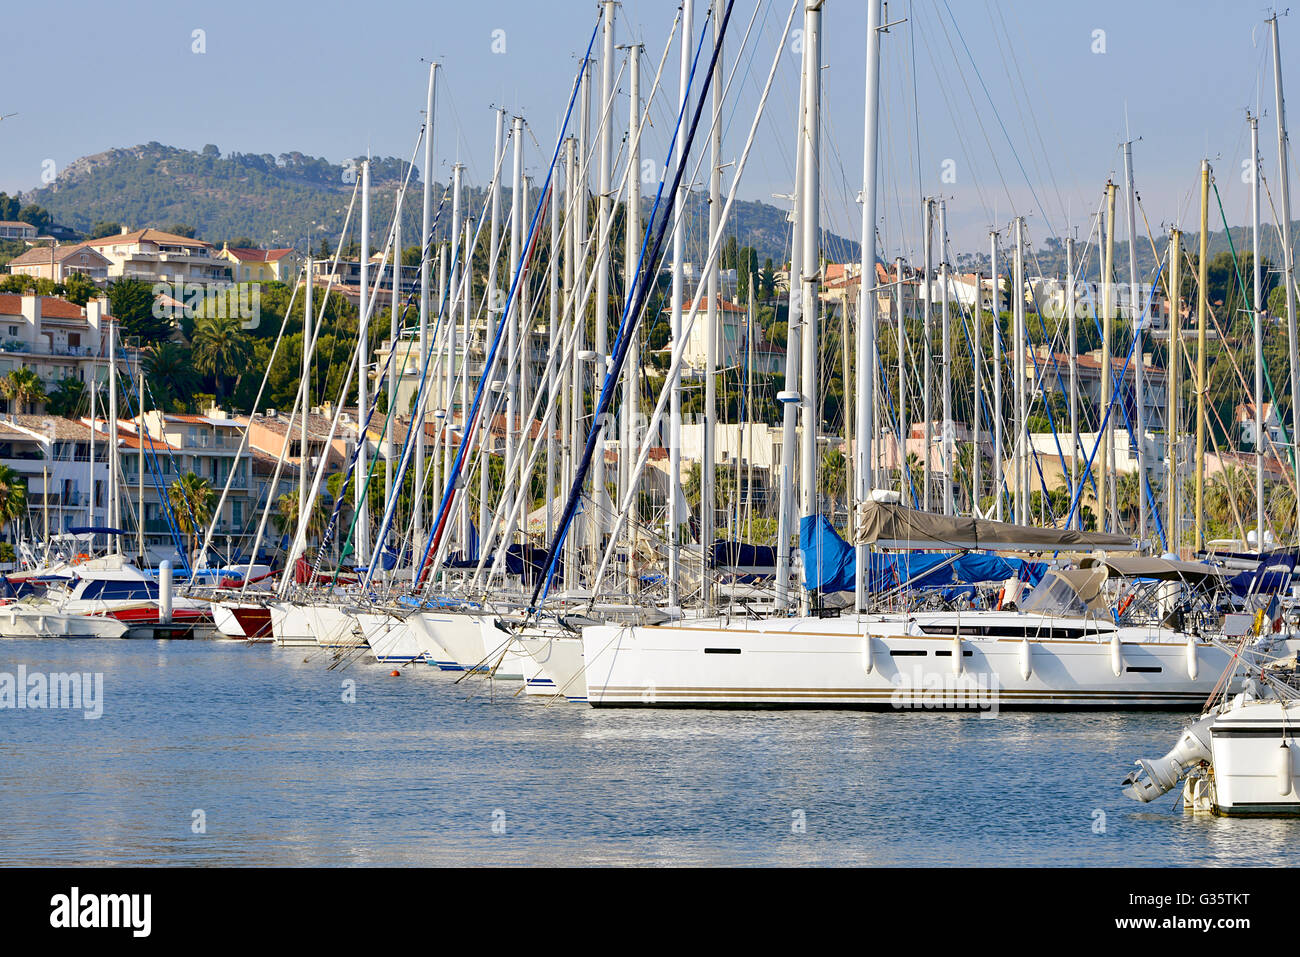 Port of Bandol, commune in the Var department in the Provence-Alpes-Côte d'Azur region in southeastern France. Stock Photo